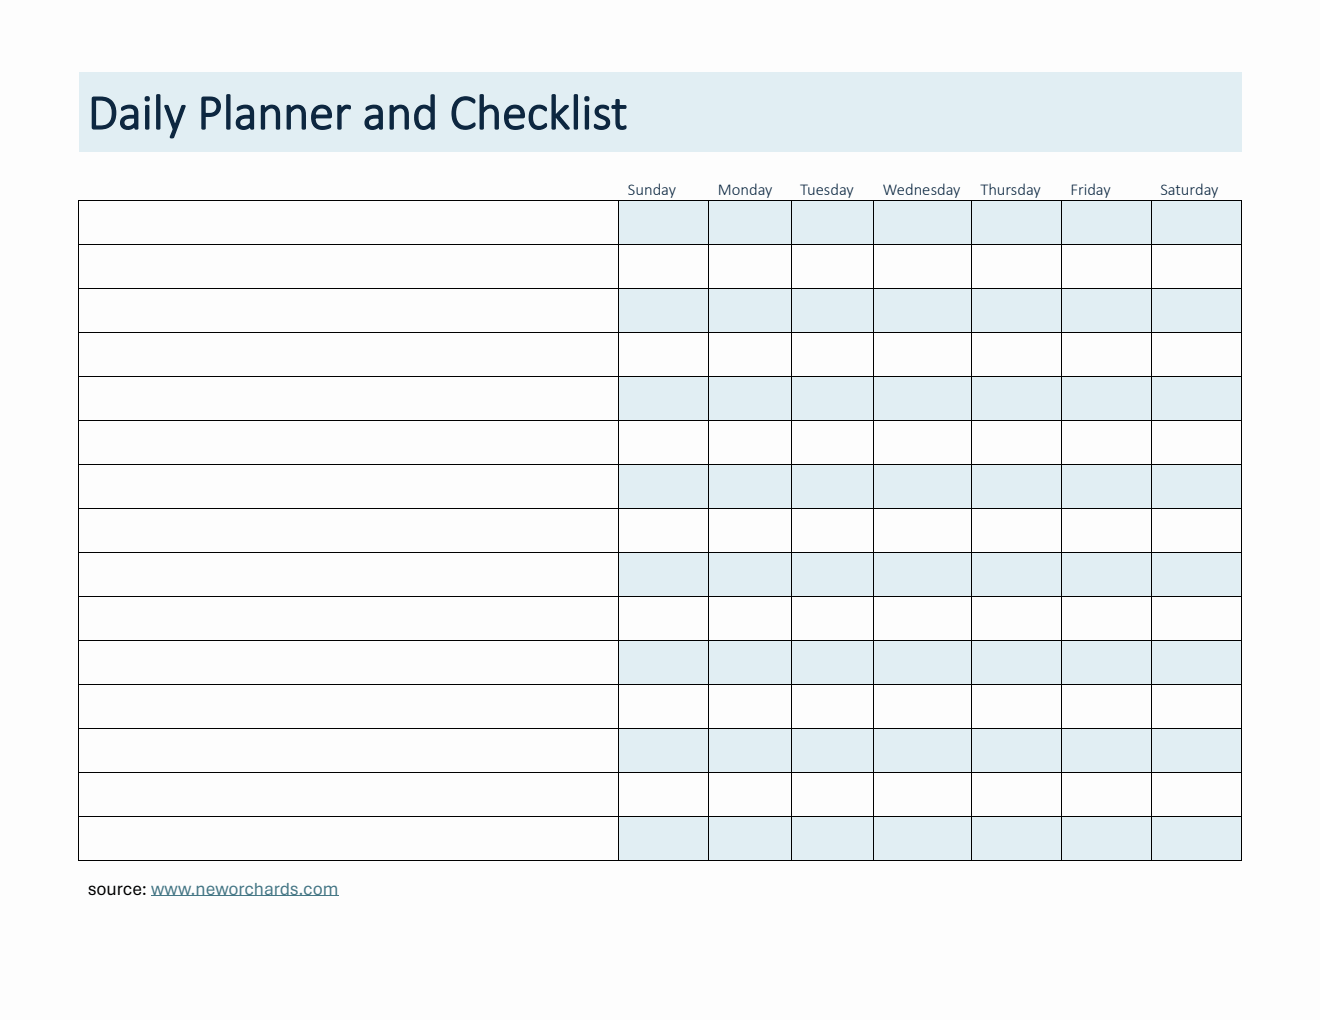 Daily Planner and Checklist Template in Word (Blue)